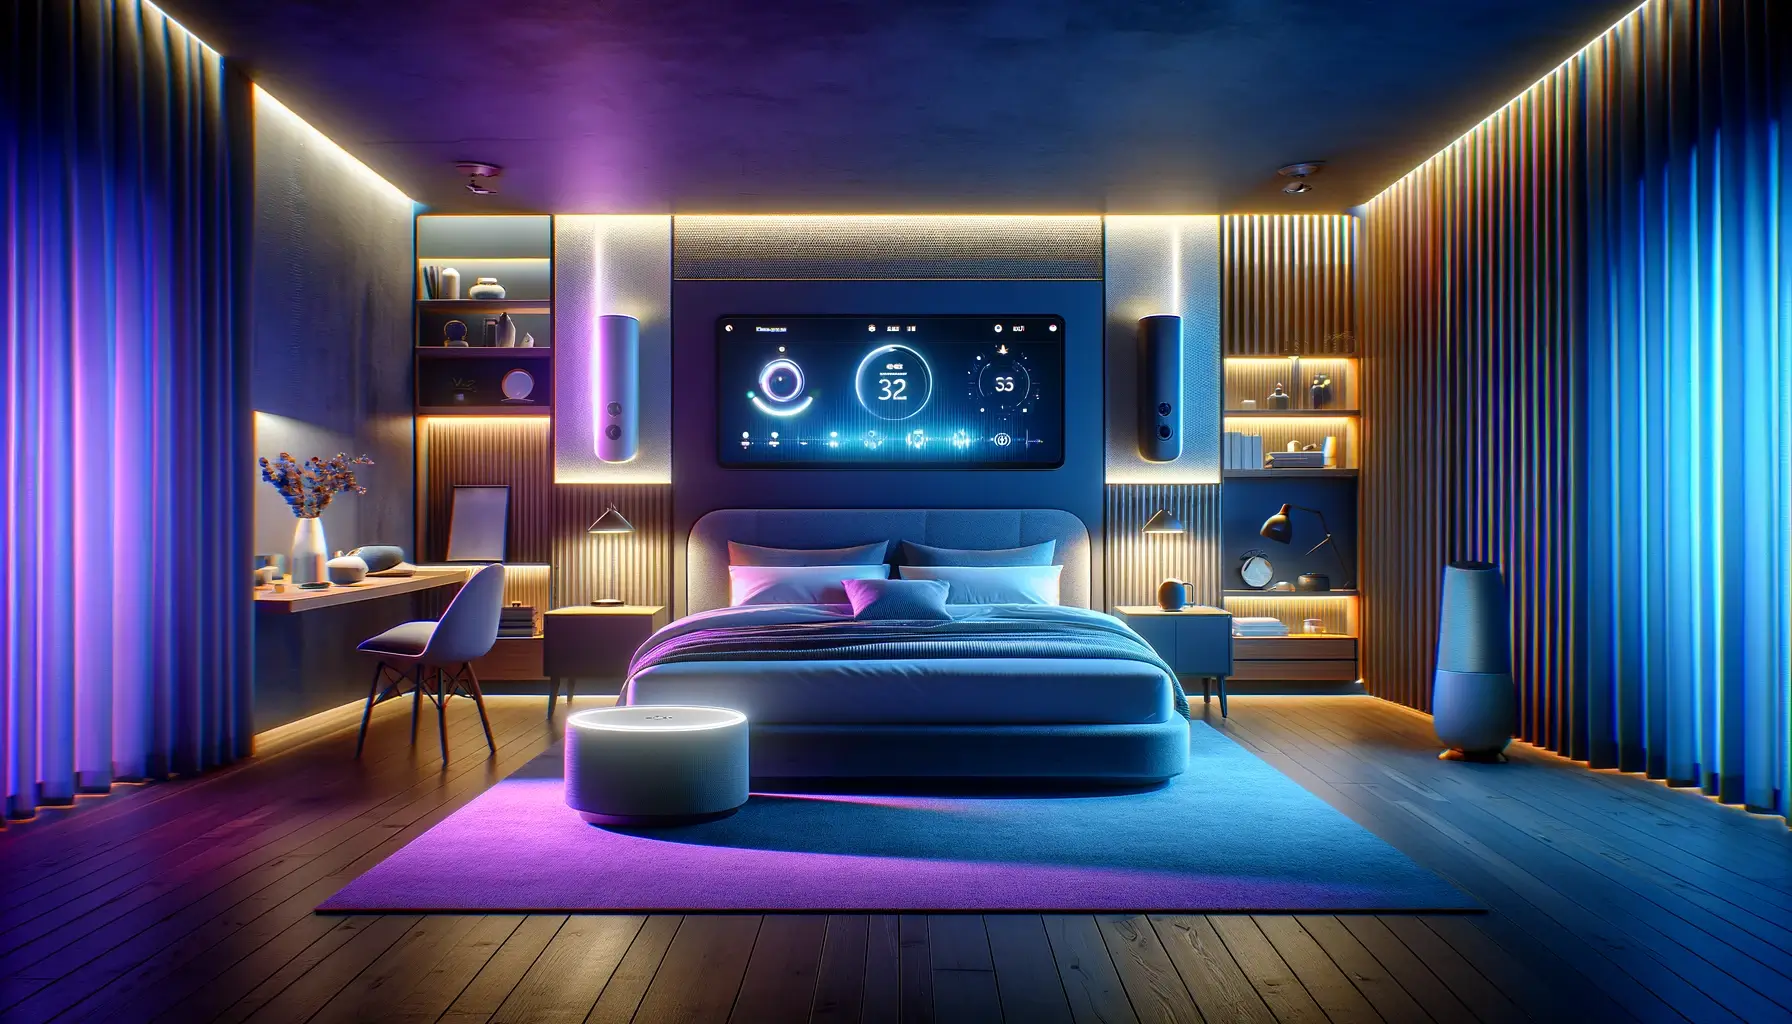 Optimization of sleep environment using smart home devices